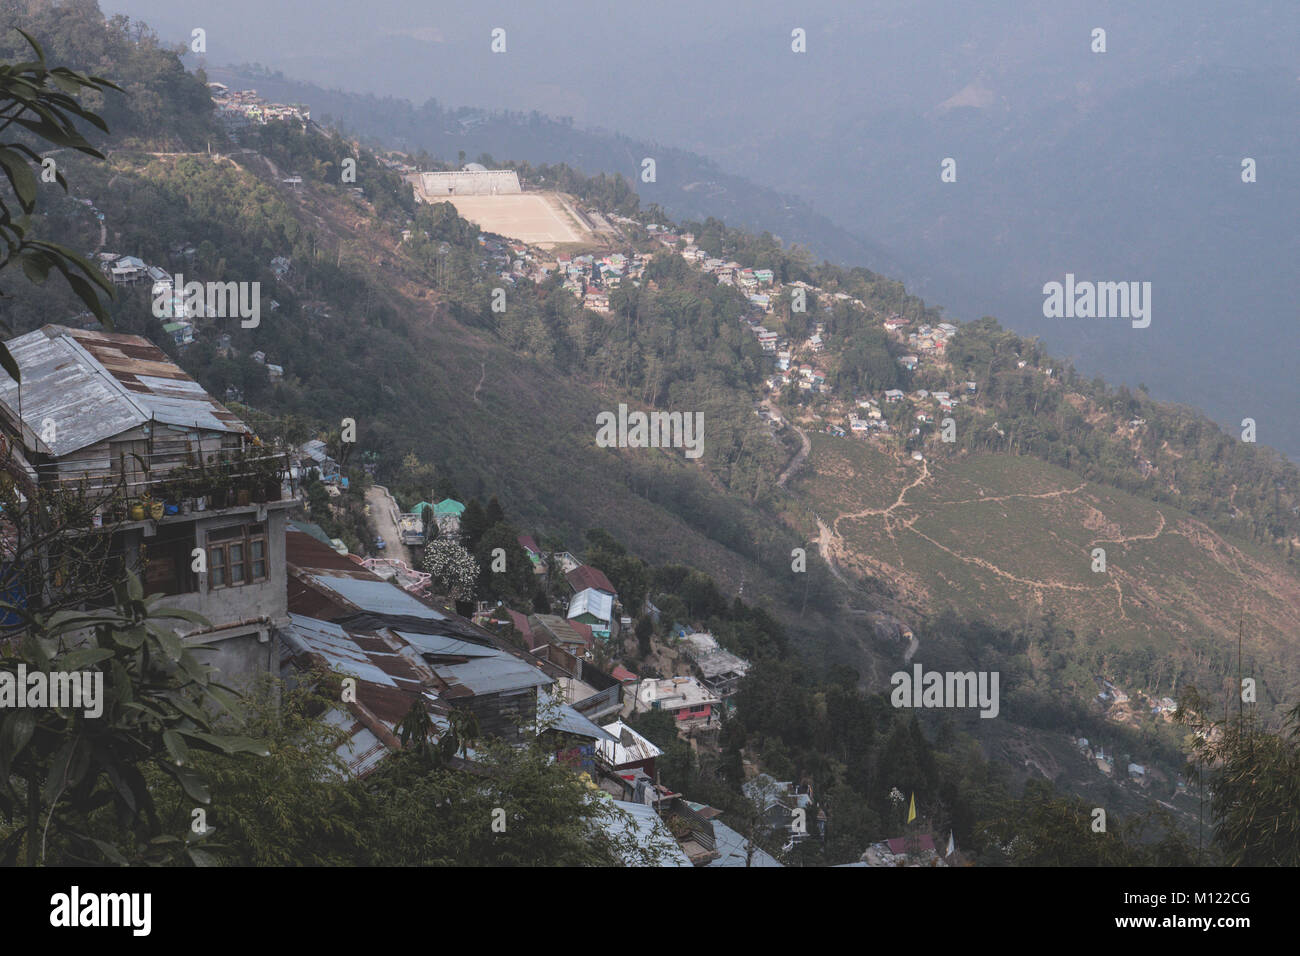 Views from Darjeerling, India Stock Photo